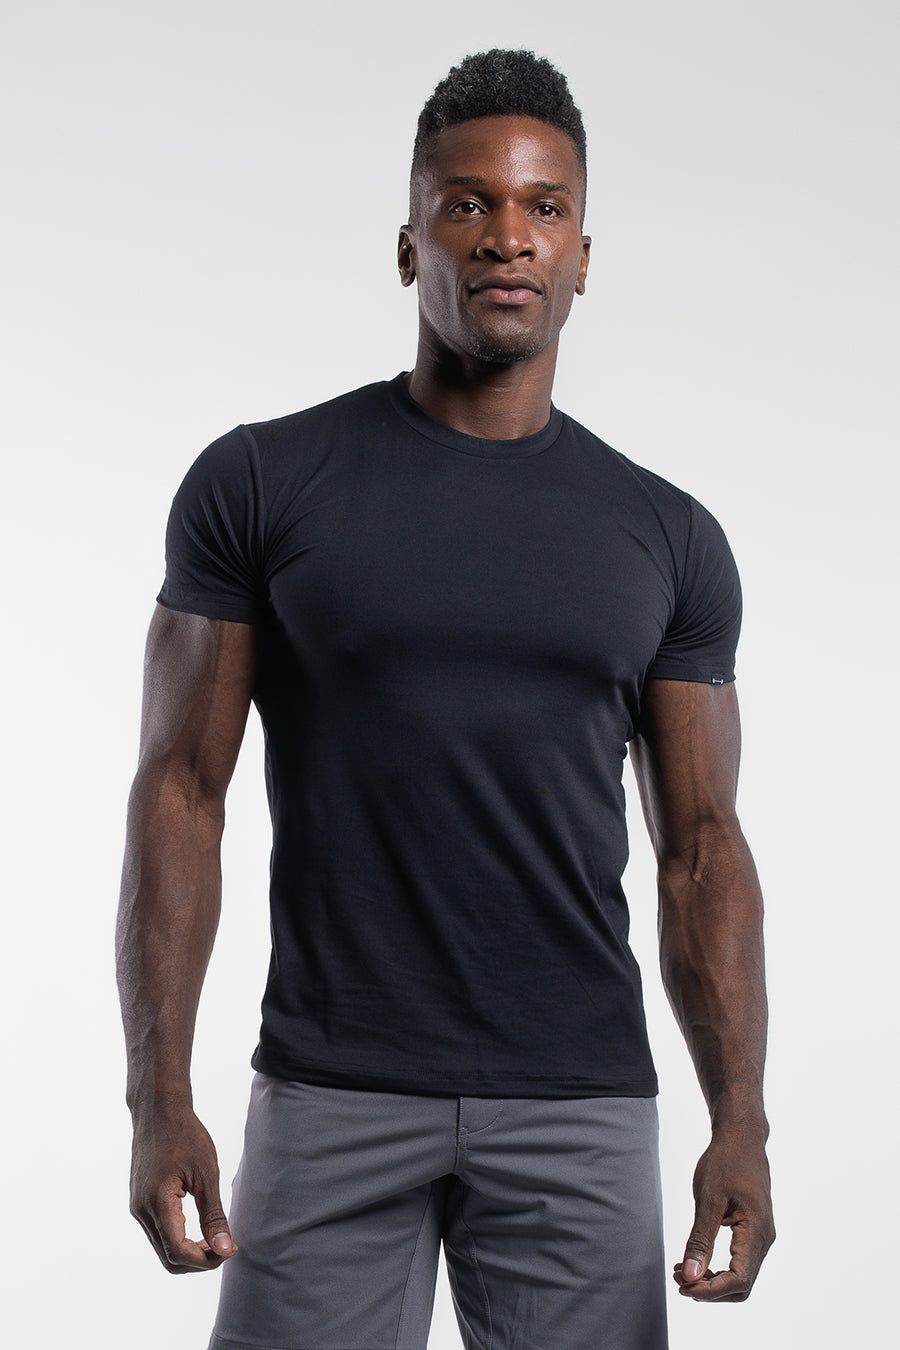 RoxZoom Mens Compression Top Base Layer T Shirts Short Quick Dry Compression Tees Fitness Gym Tops Athletic Tshirt